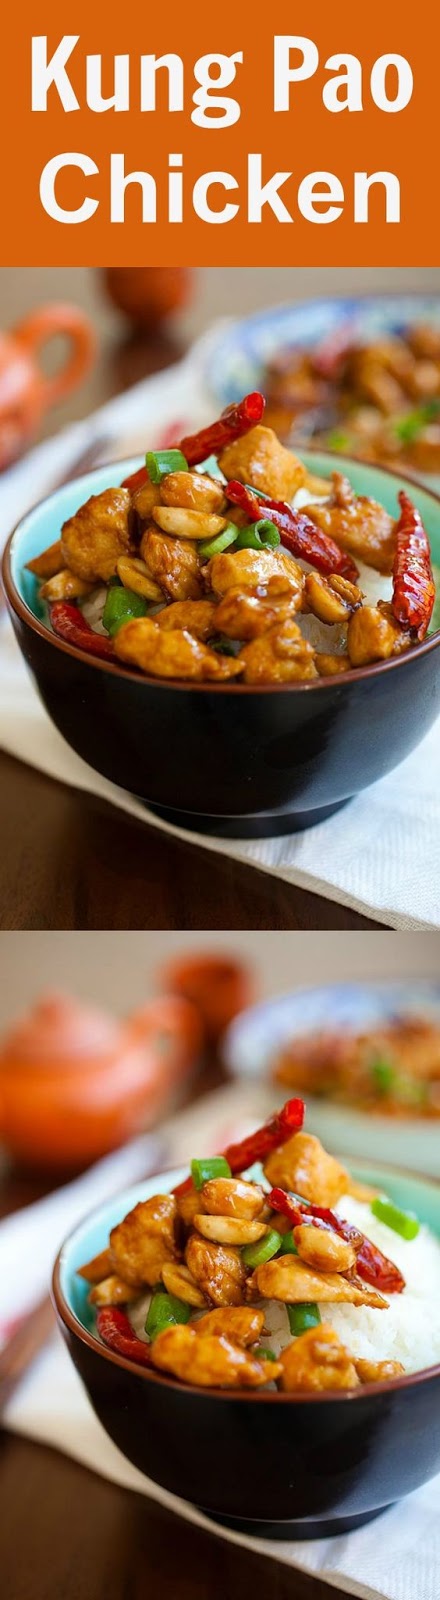 HOW TO MAKE AUTHENTIC CHINESE KUNG PAO CHICKEN: - Cooking Recipes